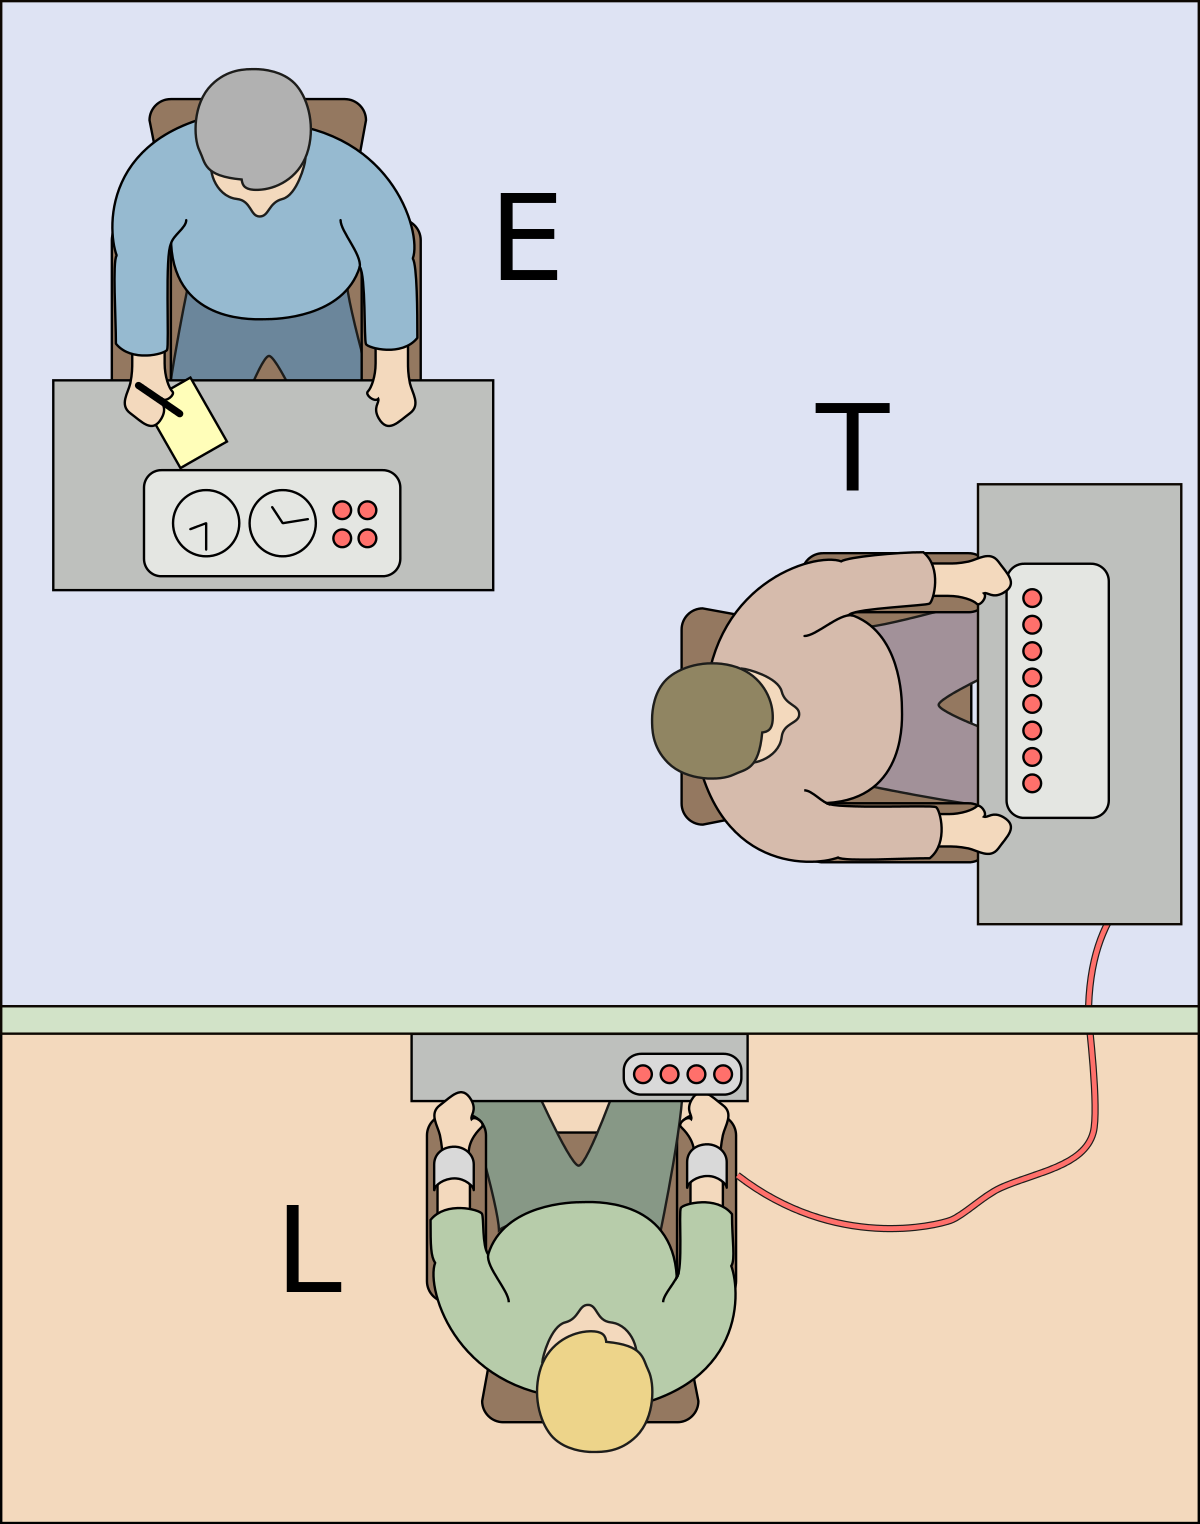 <p><strong>Milgram</strong> (1961) obedience study</p>